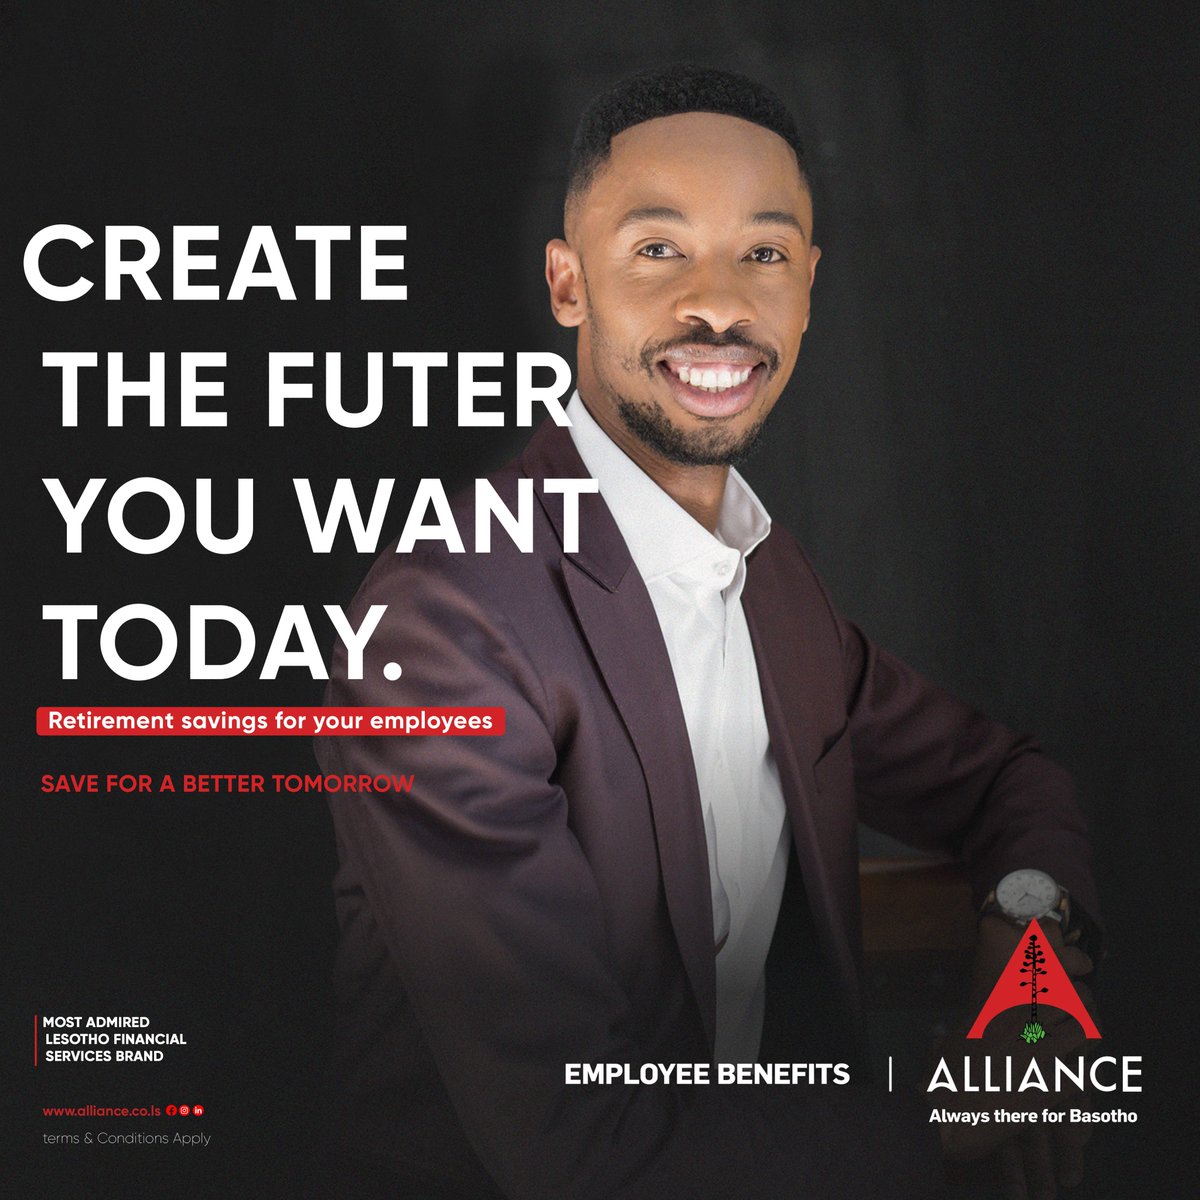 [SPONSORED]
Create the future you want, today, with Alliance Insurance. 
#allianceinsurance #lesinsights